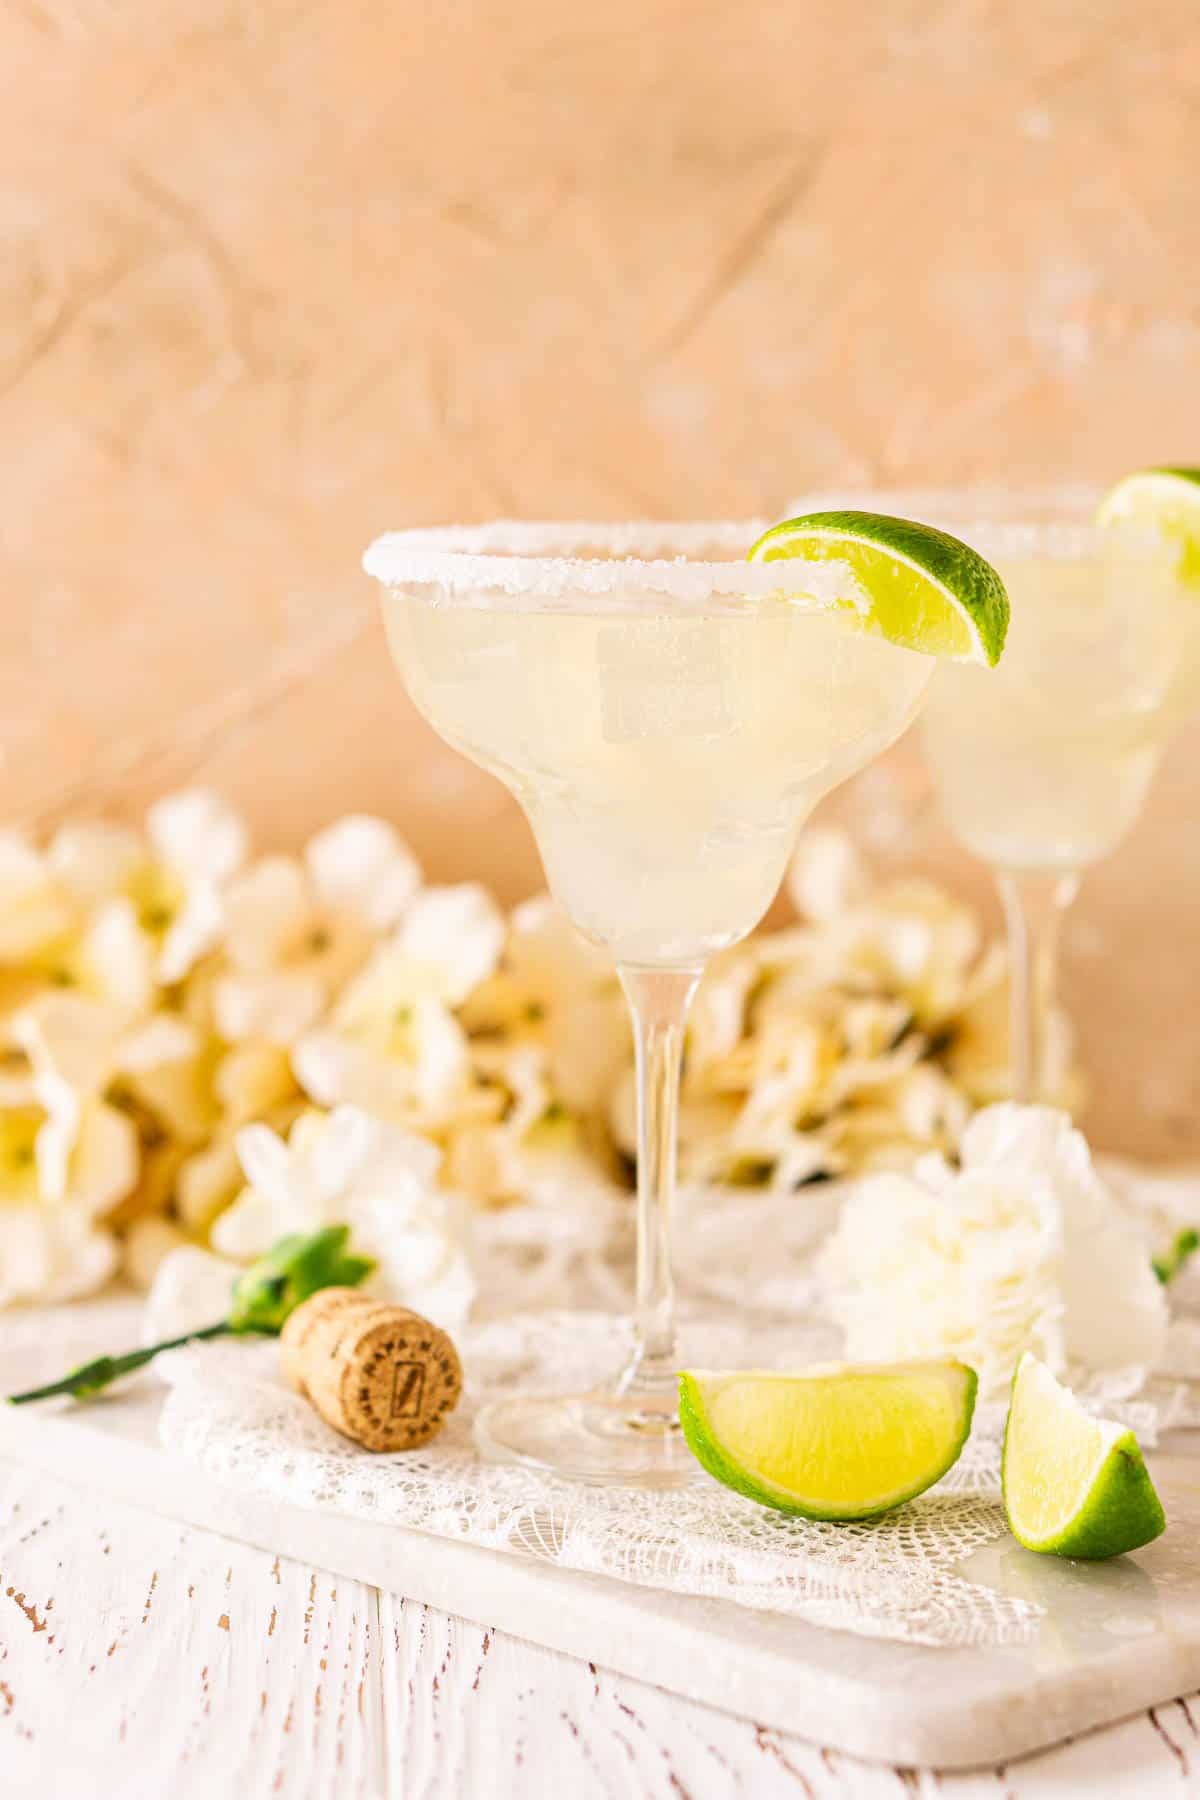 A straight-on view of the prosecco margarita on a white marble tray against a peach background with white flowers in the background and lime slices to the side.